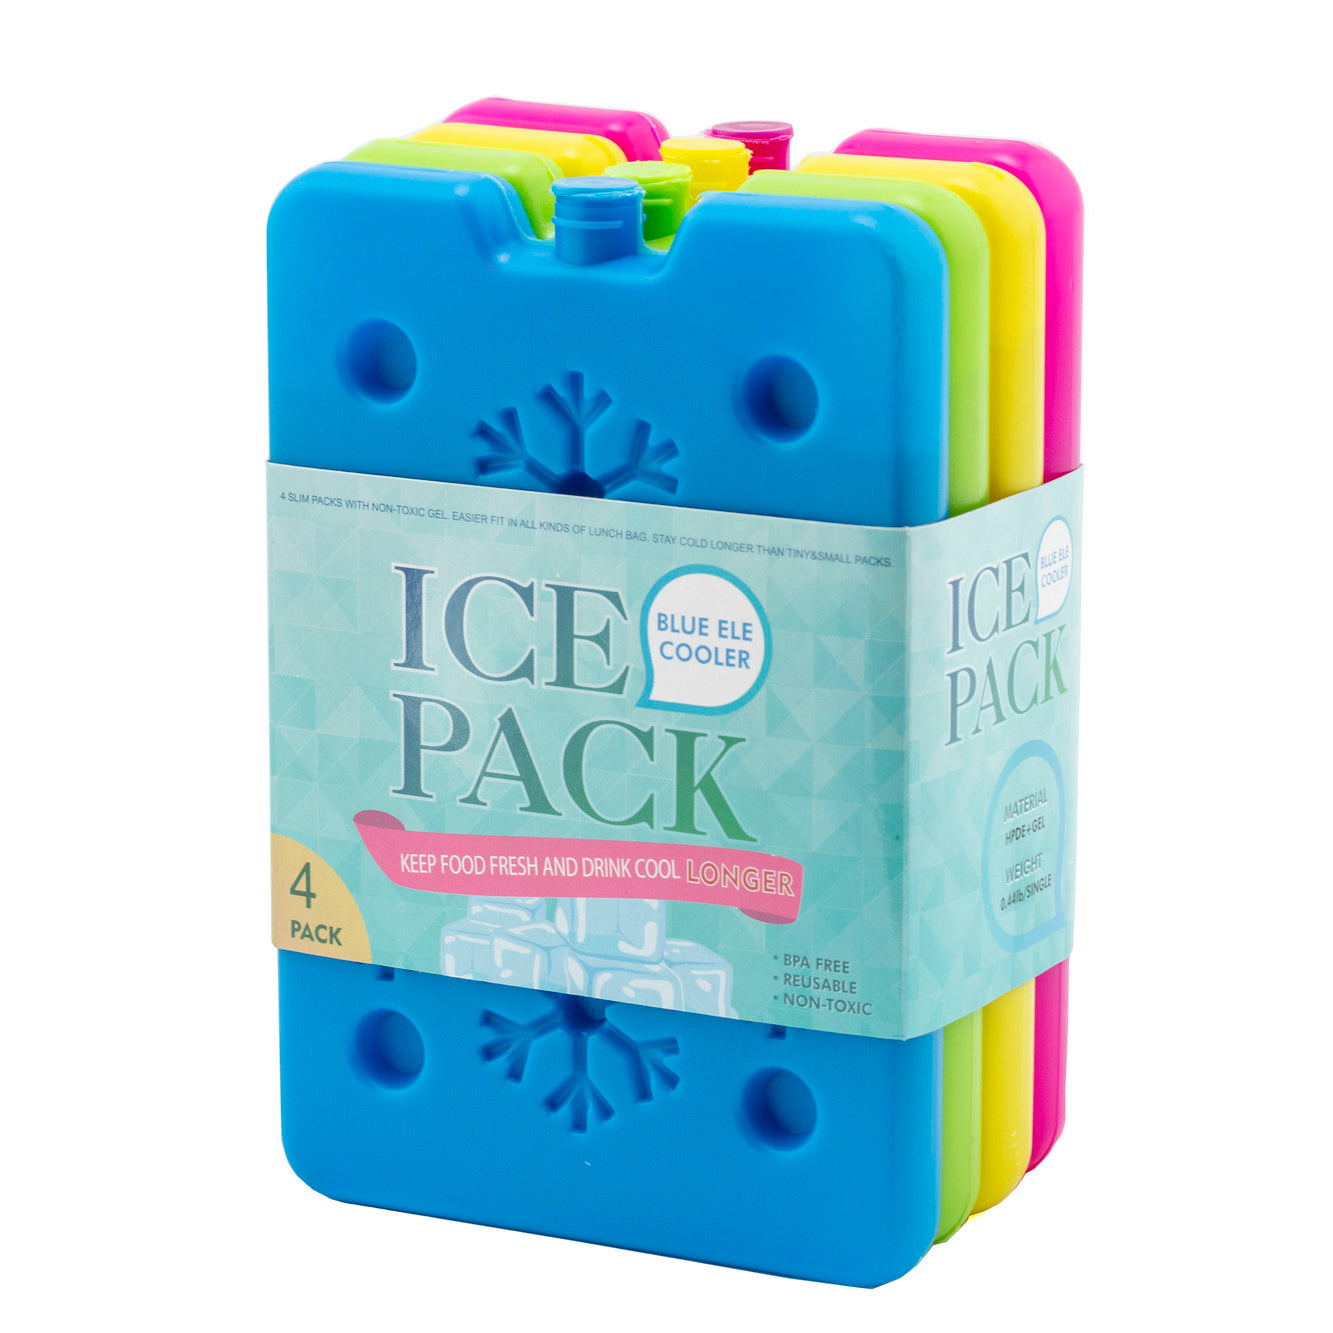 Yumbox Ice Packs - set of 4 Multi - Cool Pack, Slim Long-Lasting Ice Packs  - Great for Coolers or Lunch Box